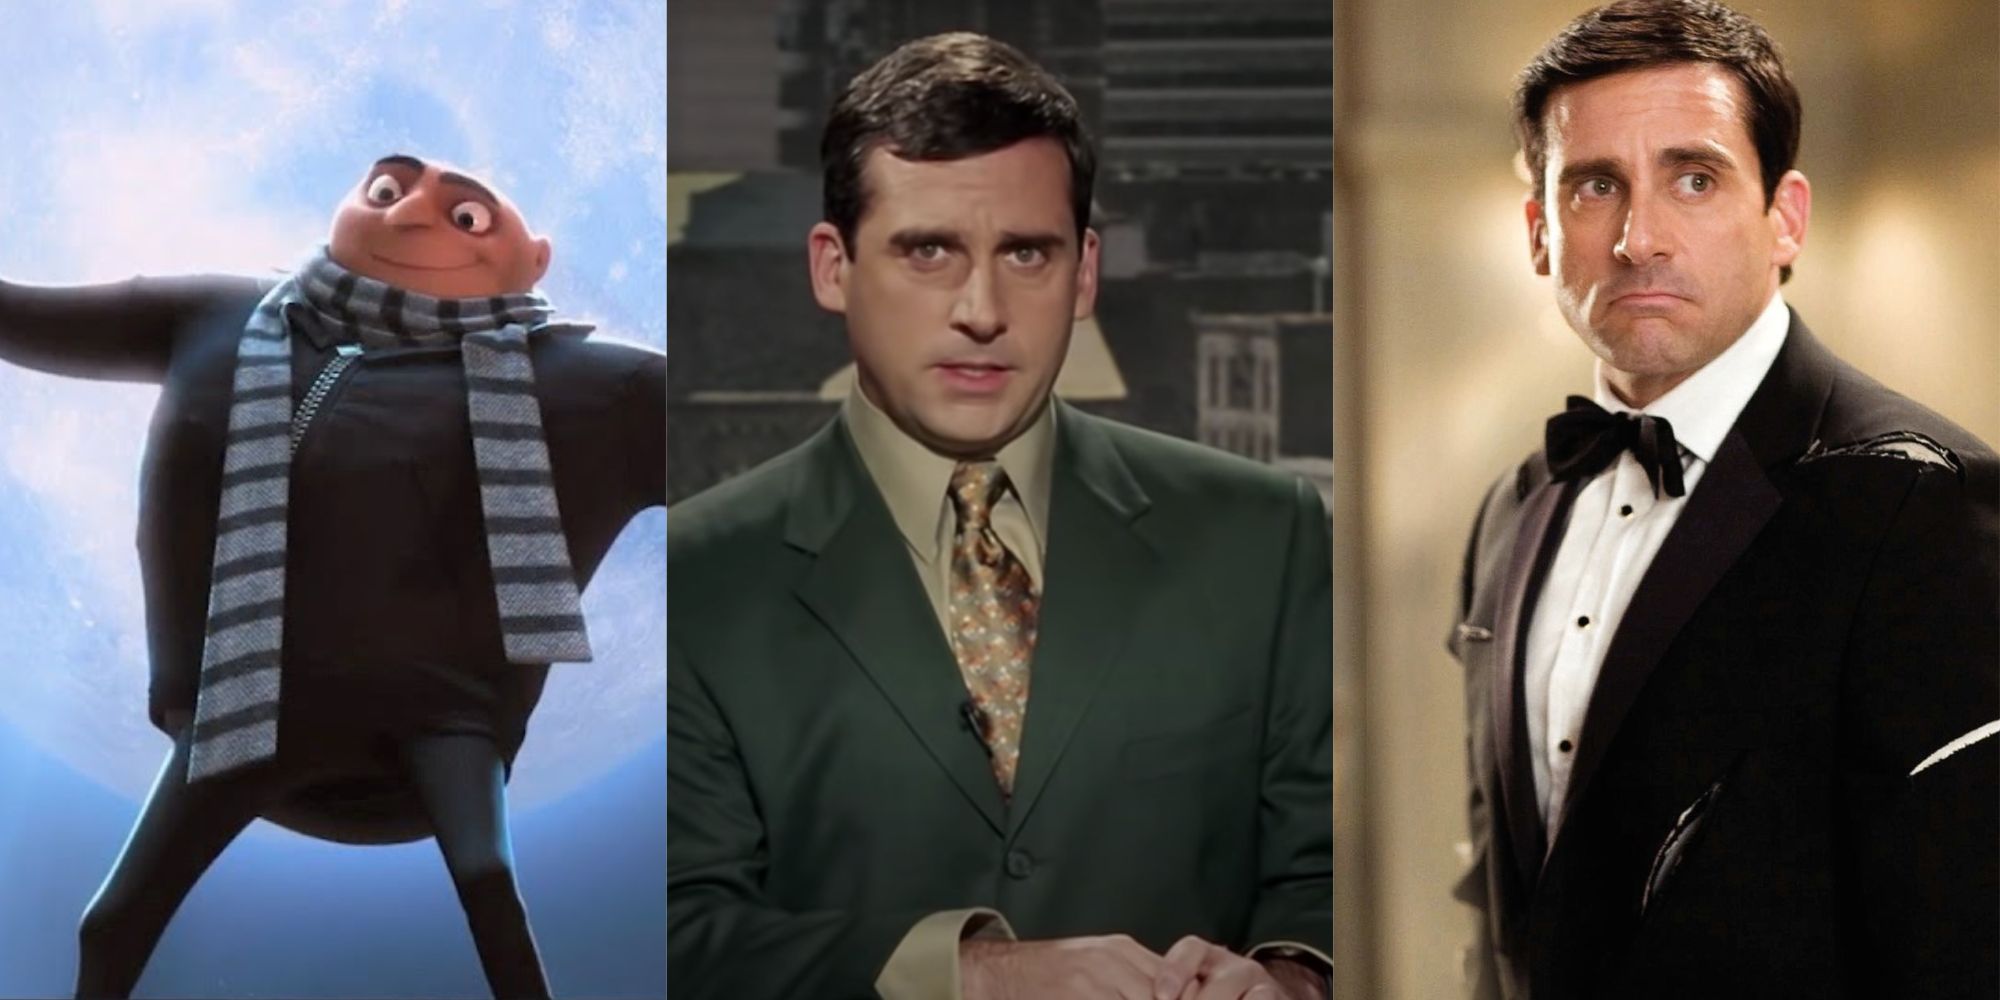 Split images of Steve Carell in Despicable Me, Bruce Almighty, and Get Smart